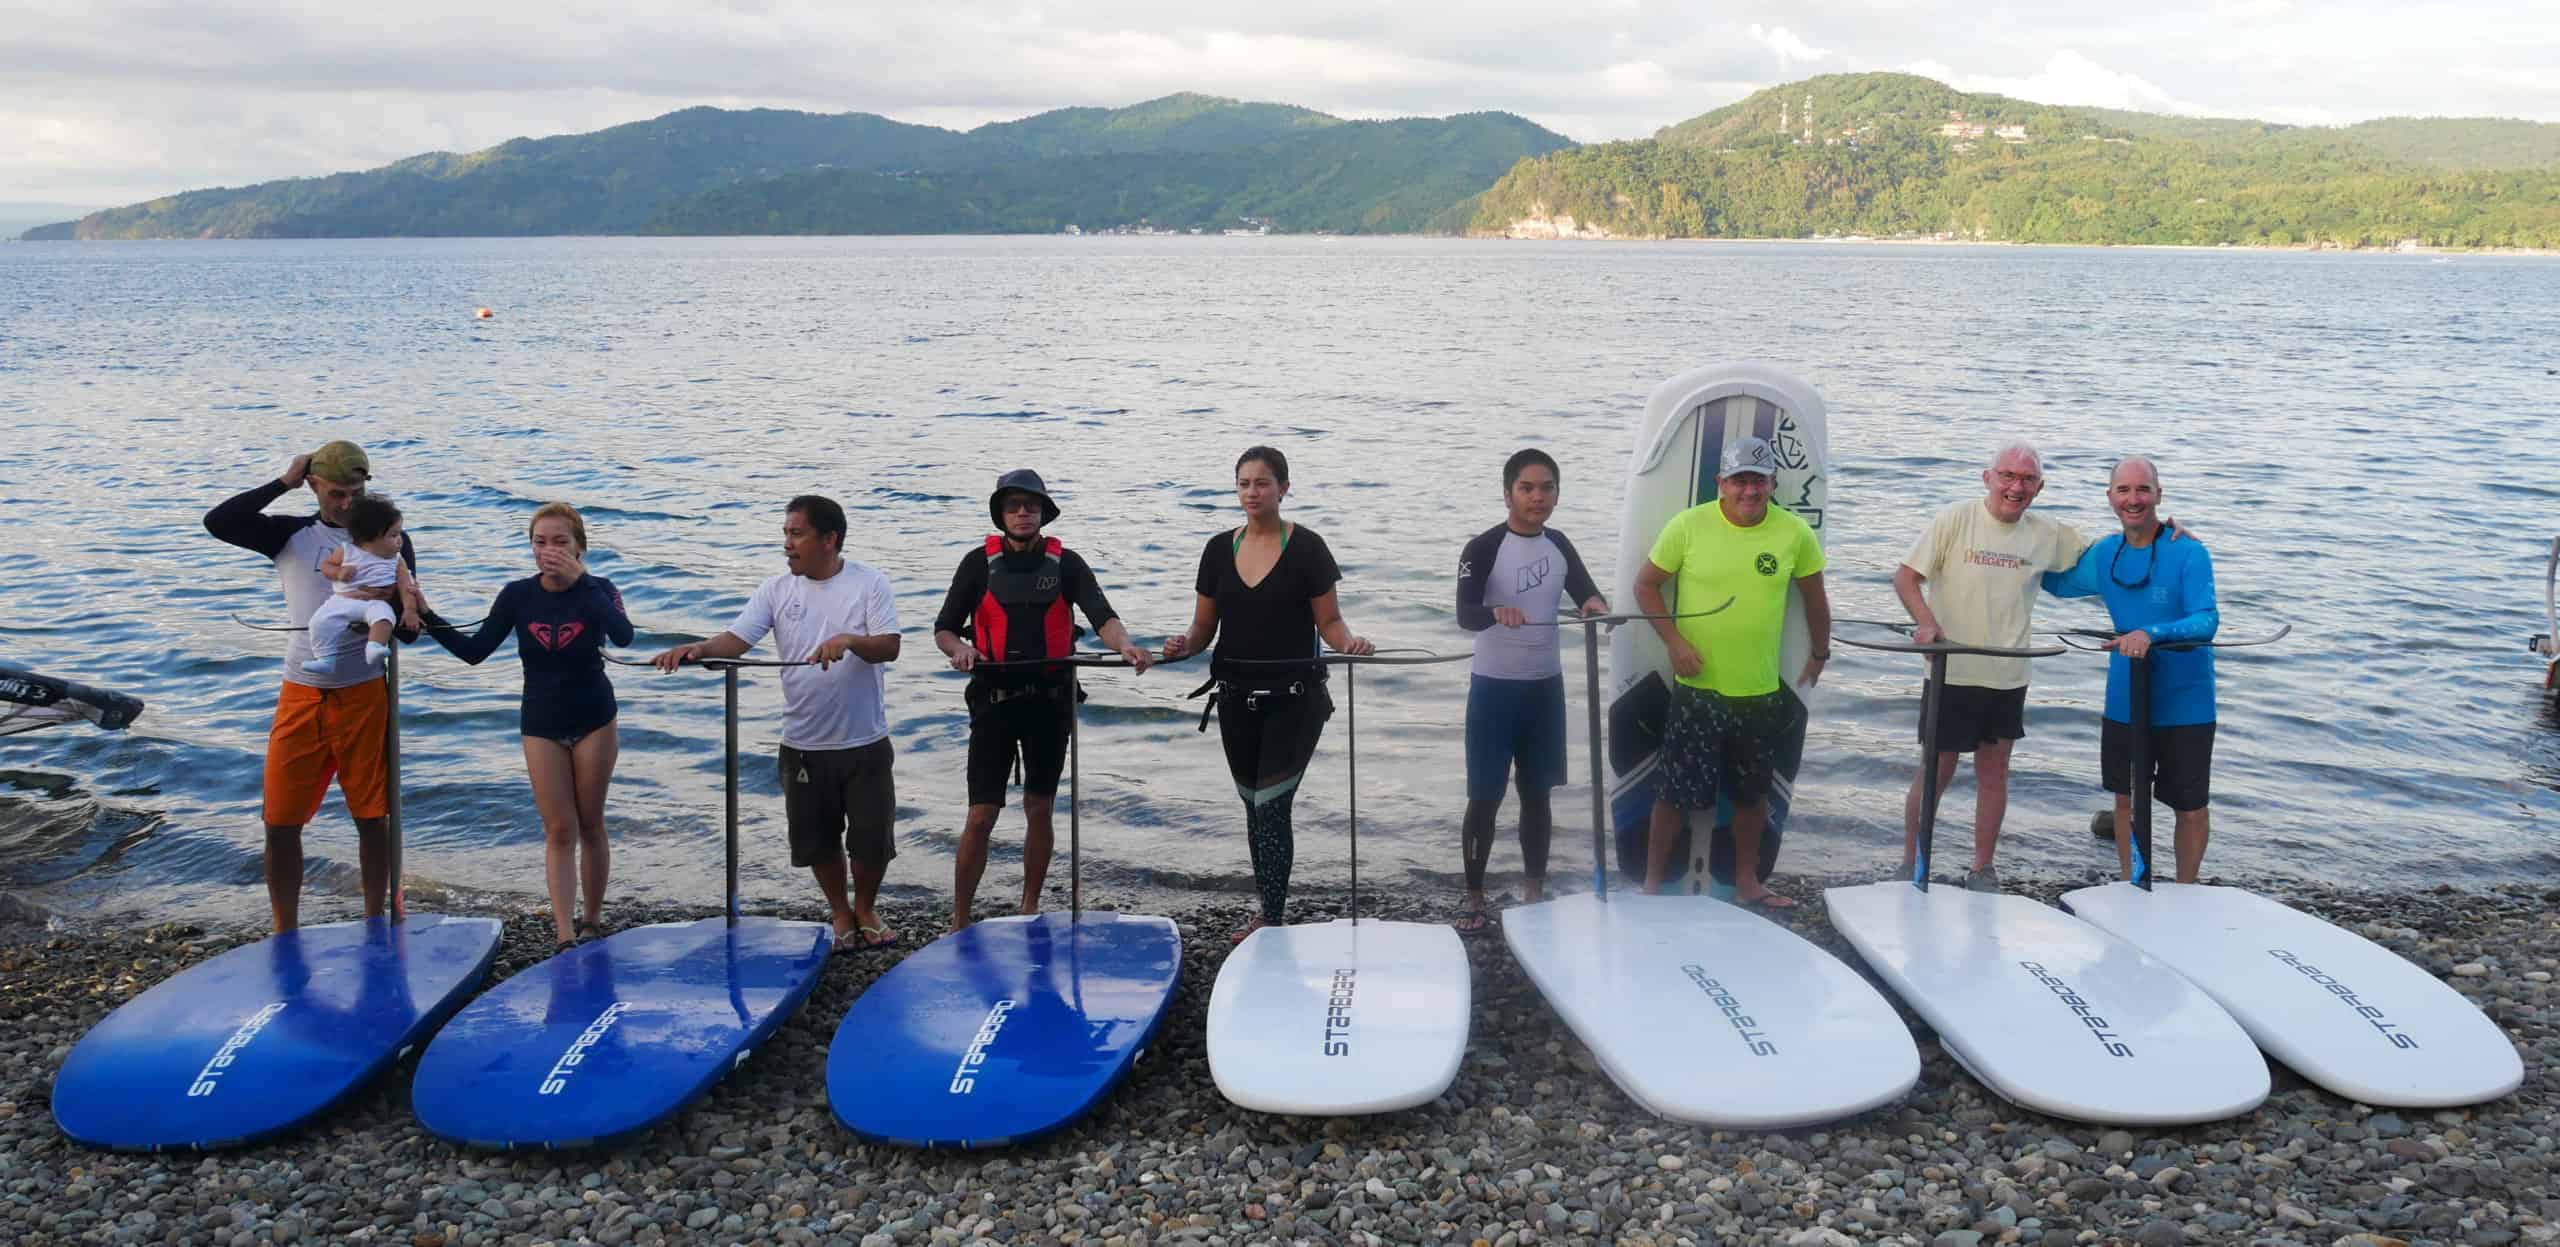 Starboard Foil Testing And Foil Clinic - 2 - Windsurf